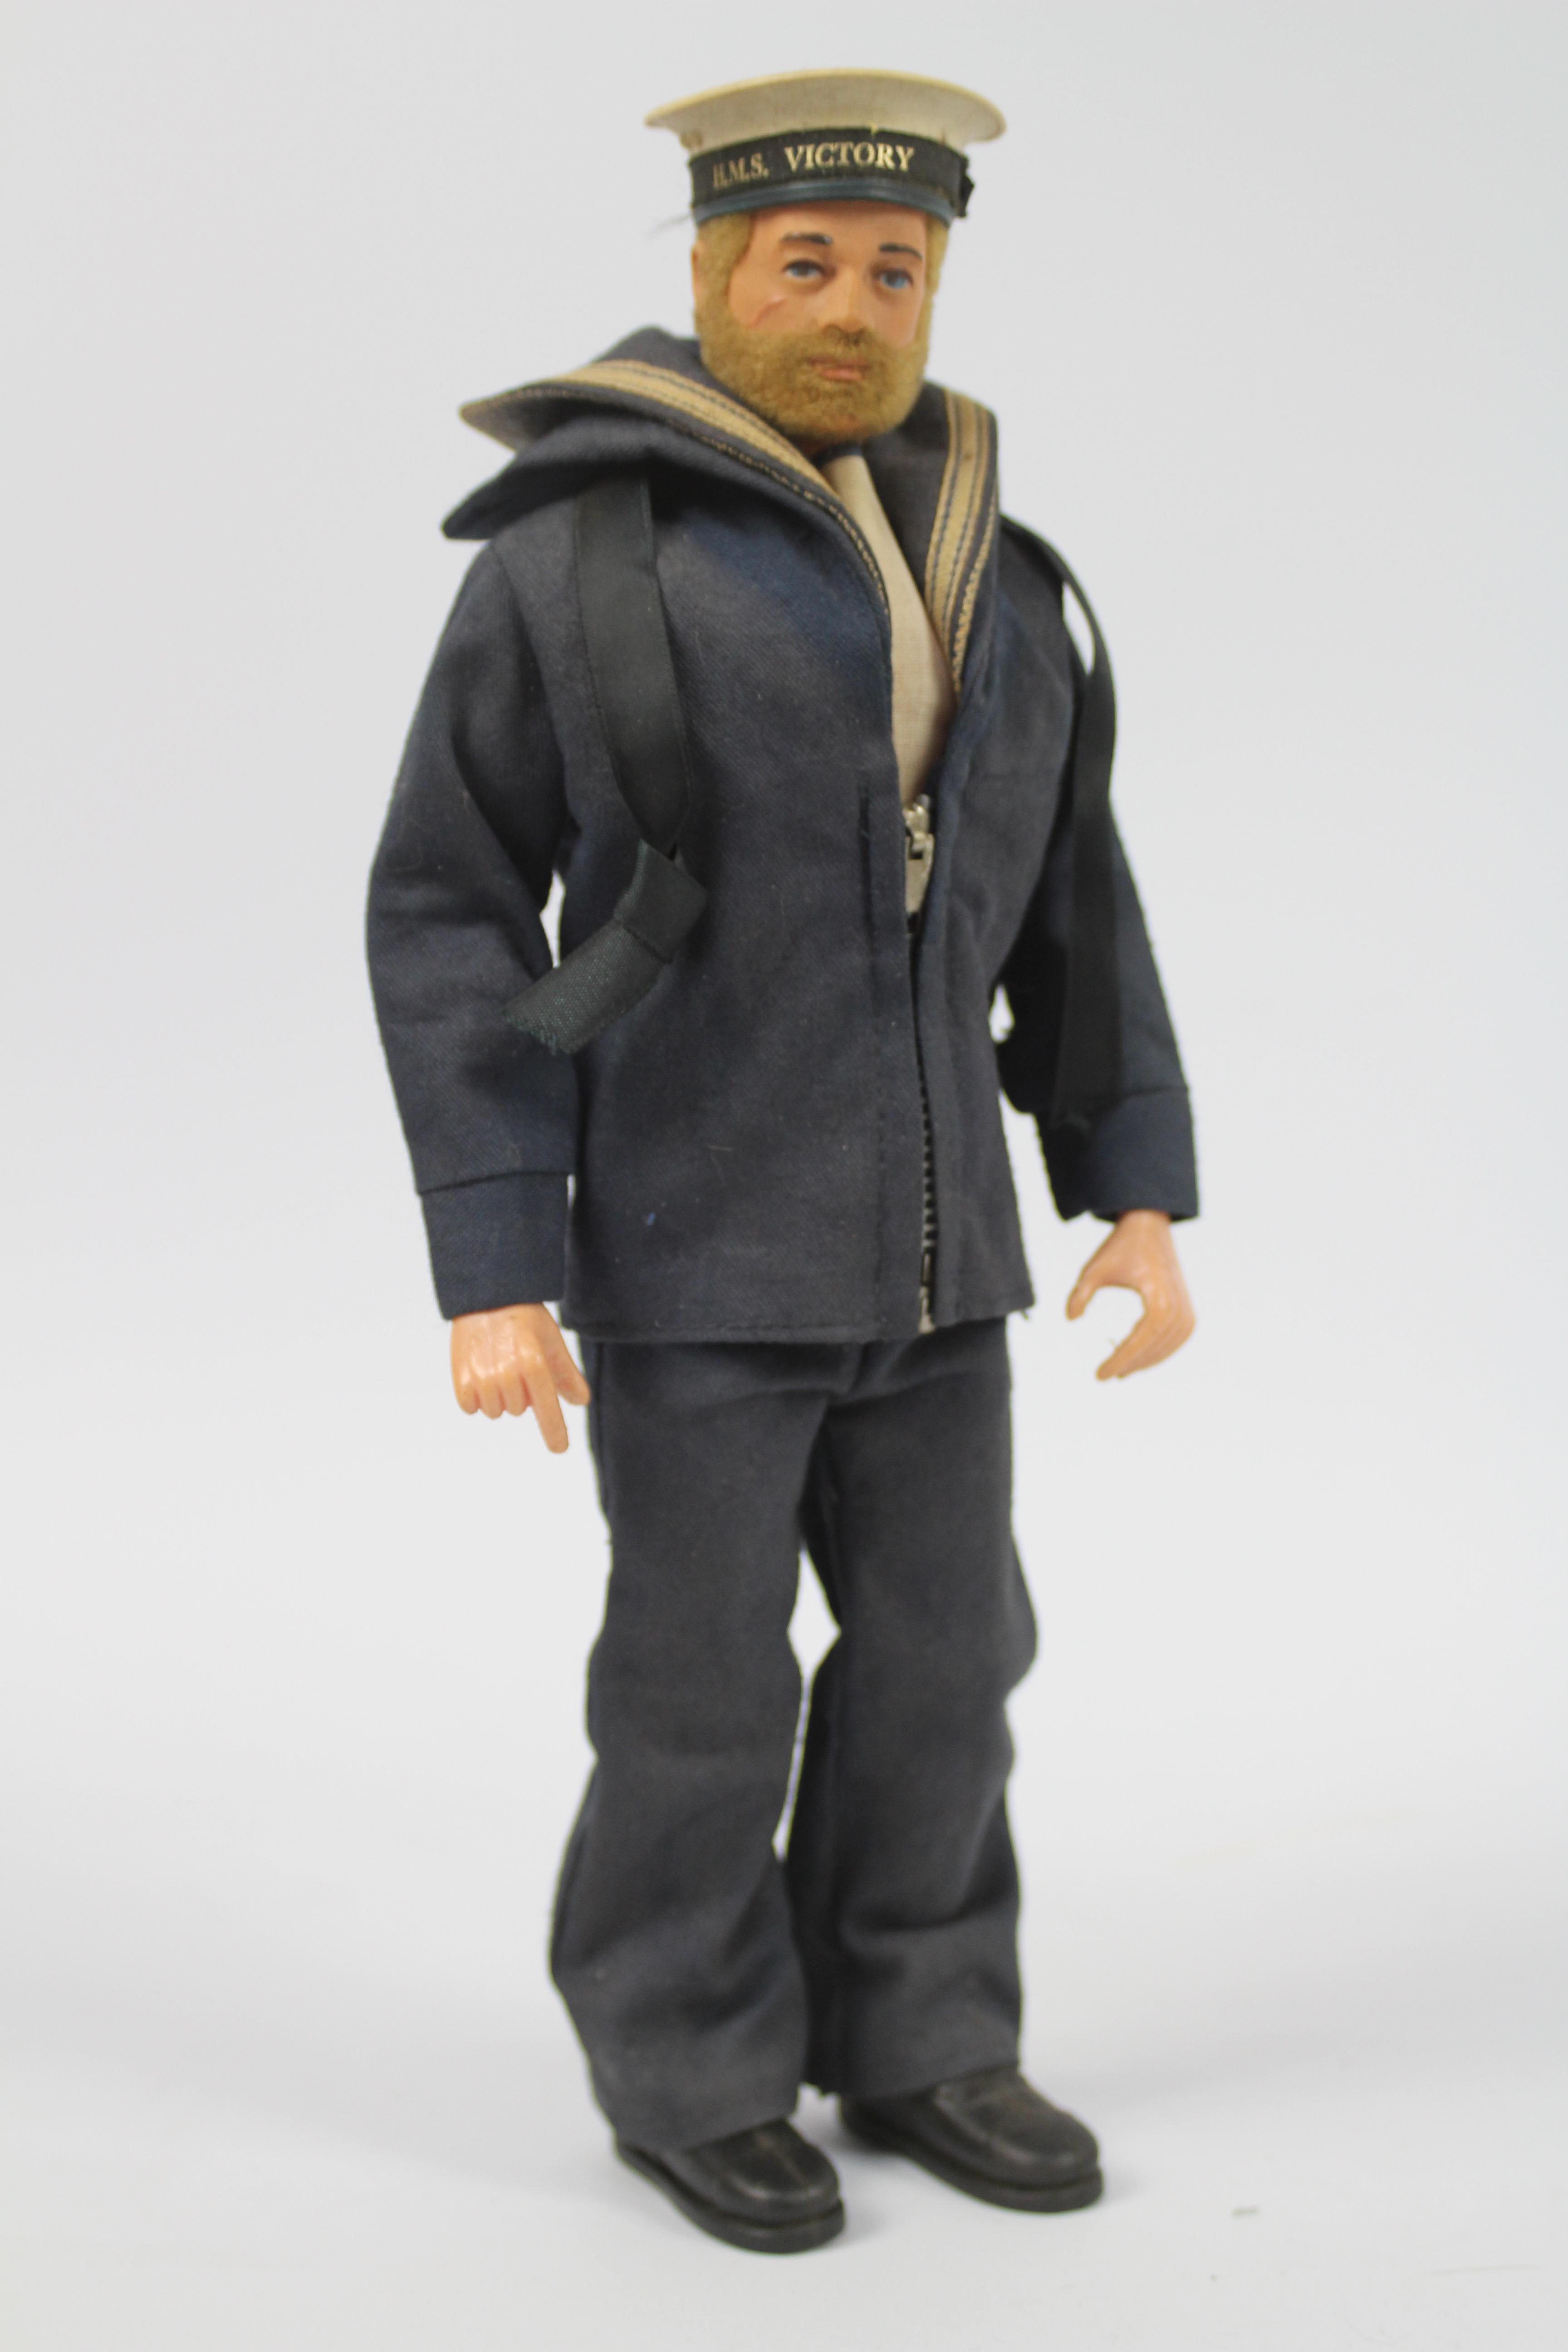 Palitoy, Action Man - A Palitoy Action Man figure in Sailor outfit.